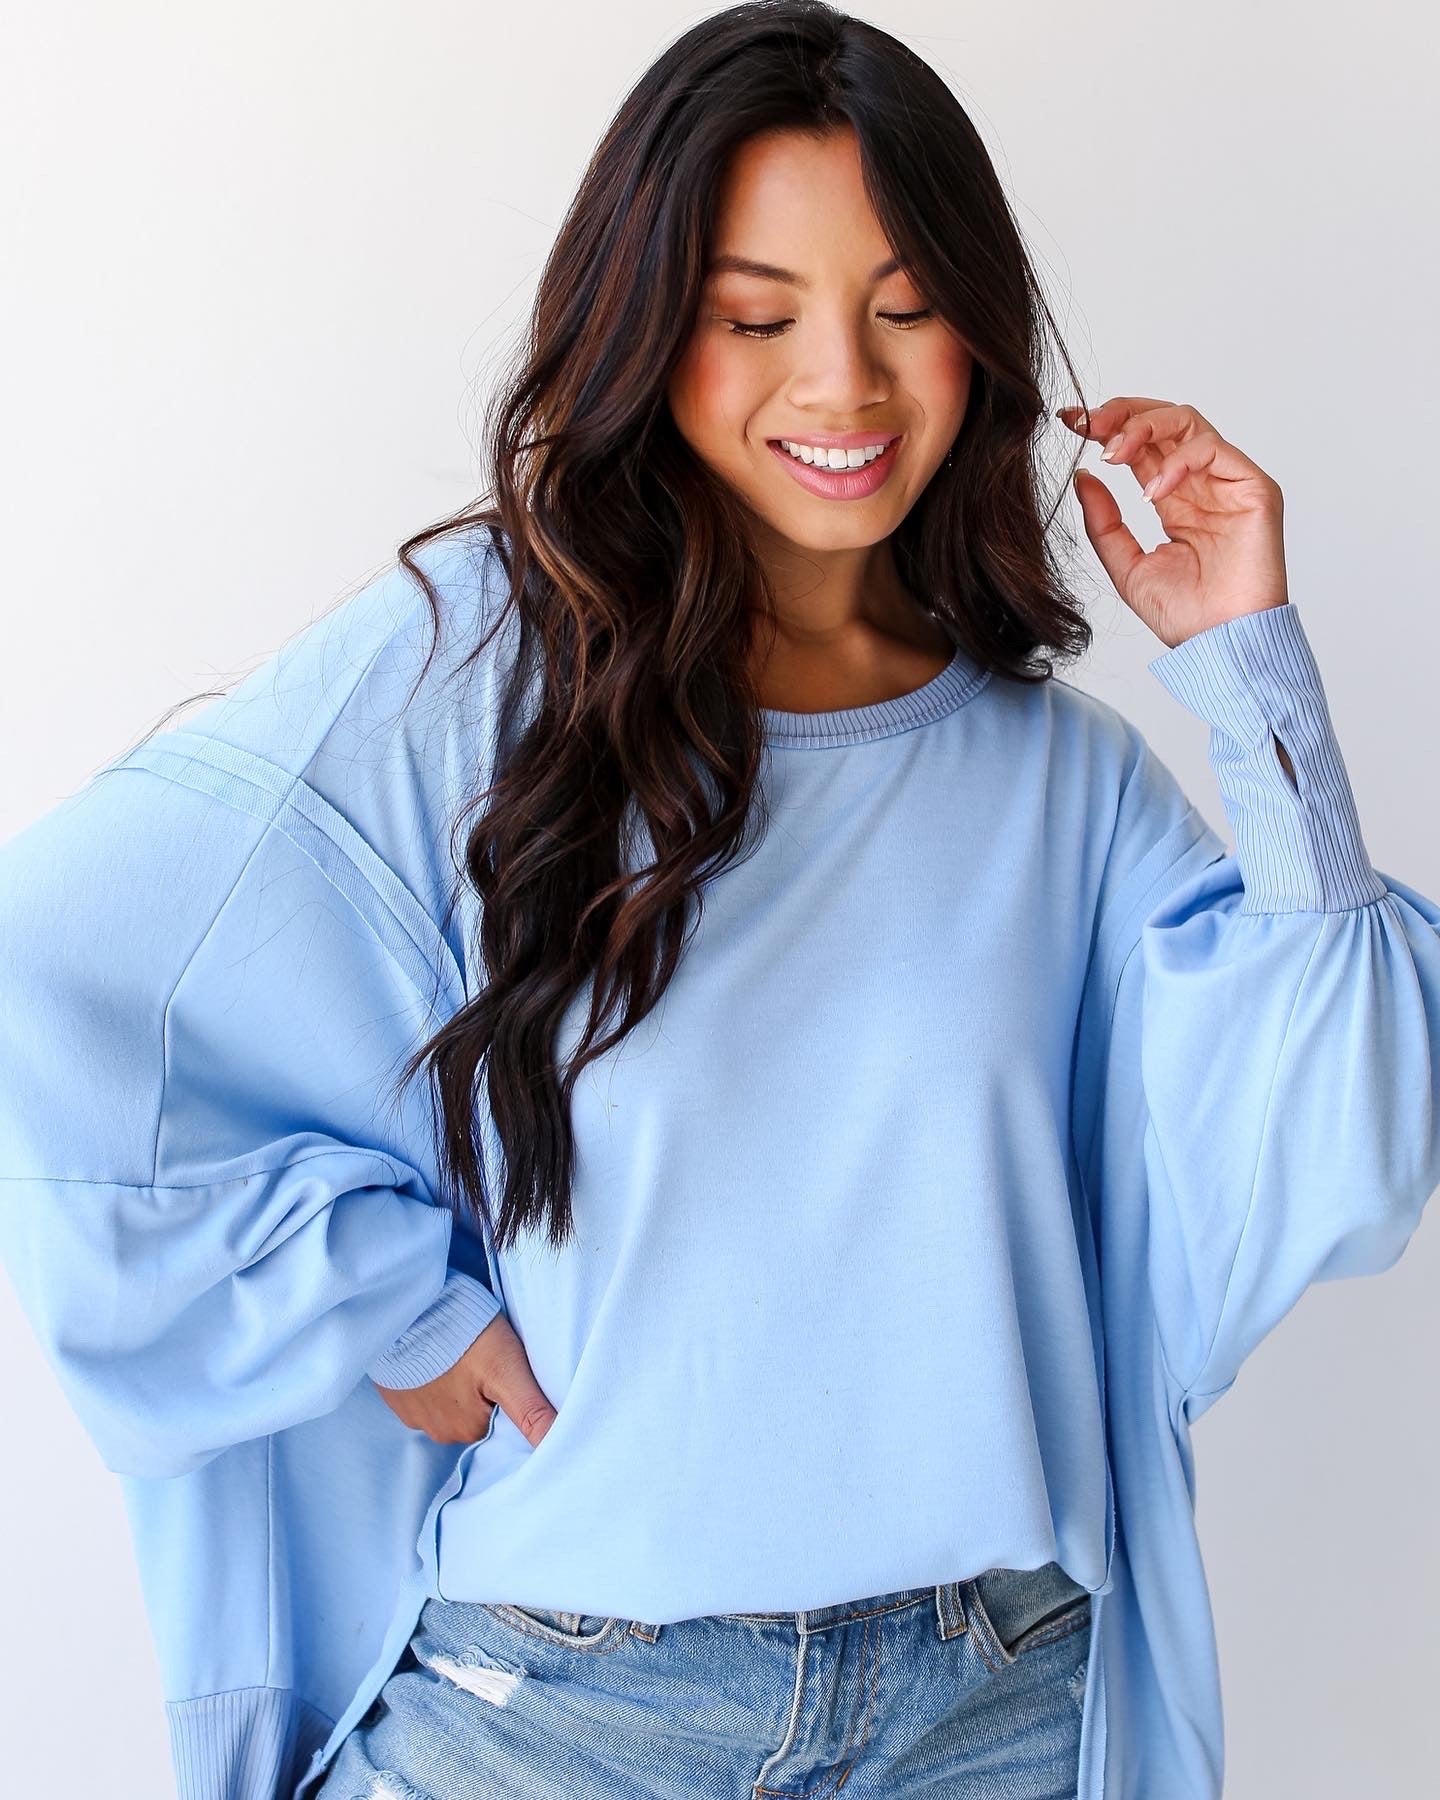 Pullovers, Hoodies, and Sweatshirts for Women – Dress Up